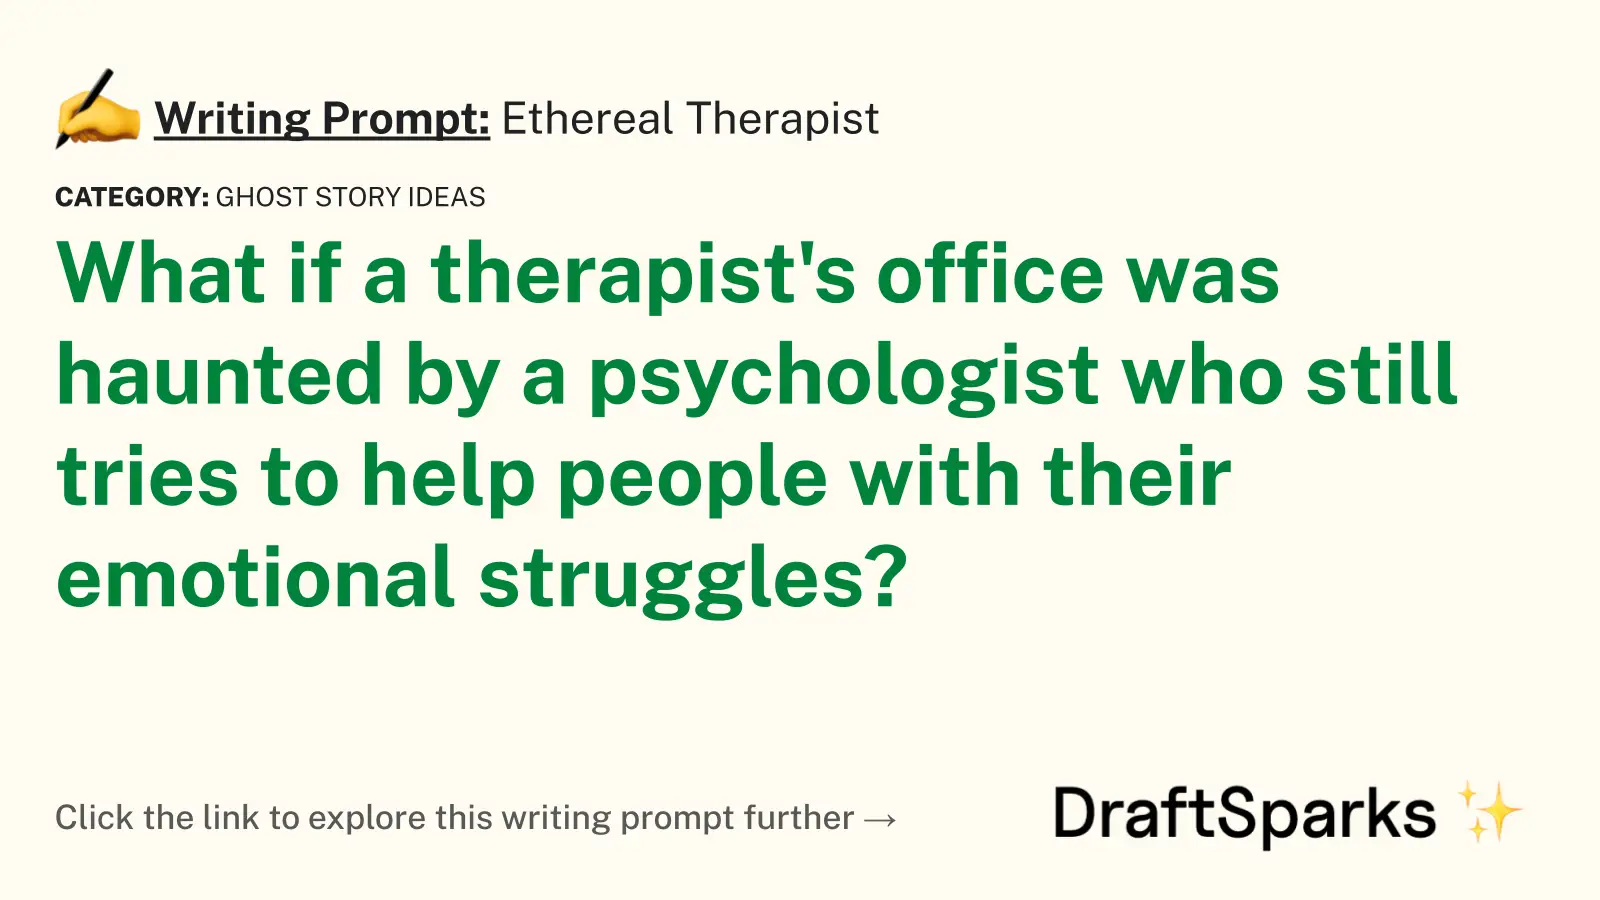 Ethereal Therapist